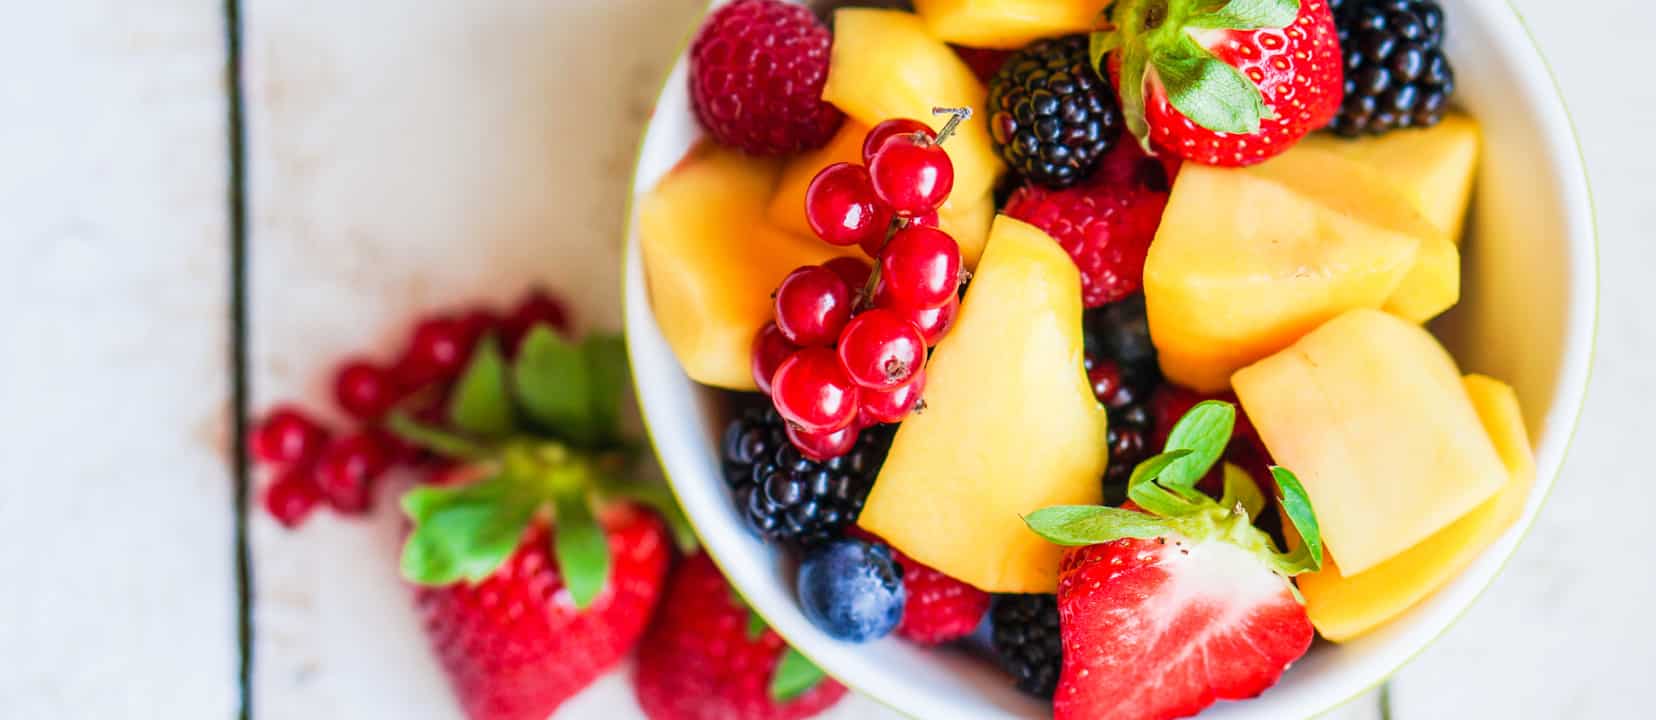 What About All the Sugar in Fruit? | NutritionFacts.org